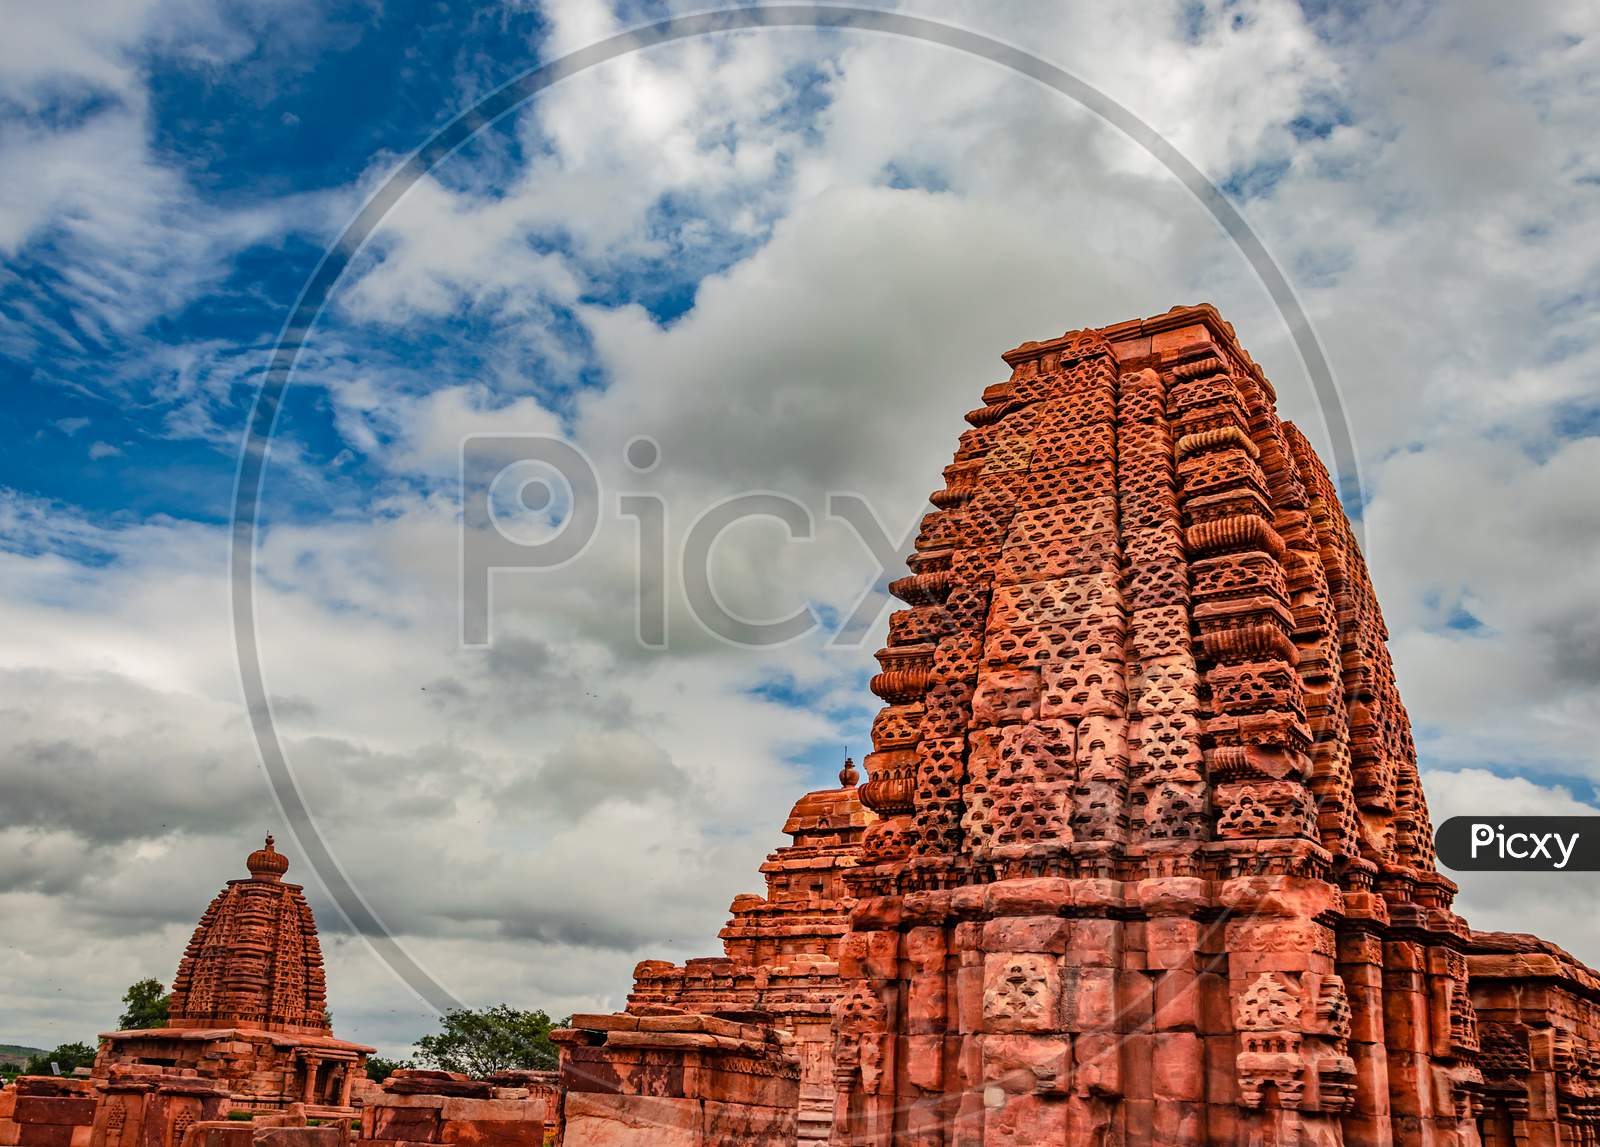 Galaganatha Temple Pattadakal Breathtaking Stone Art From Different Angle With Amazing Sky